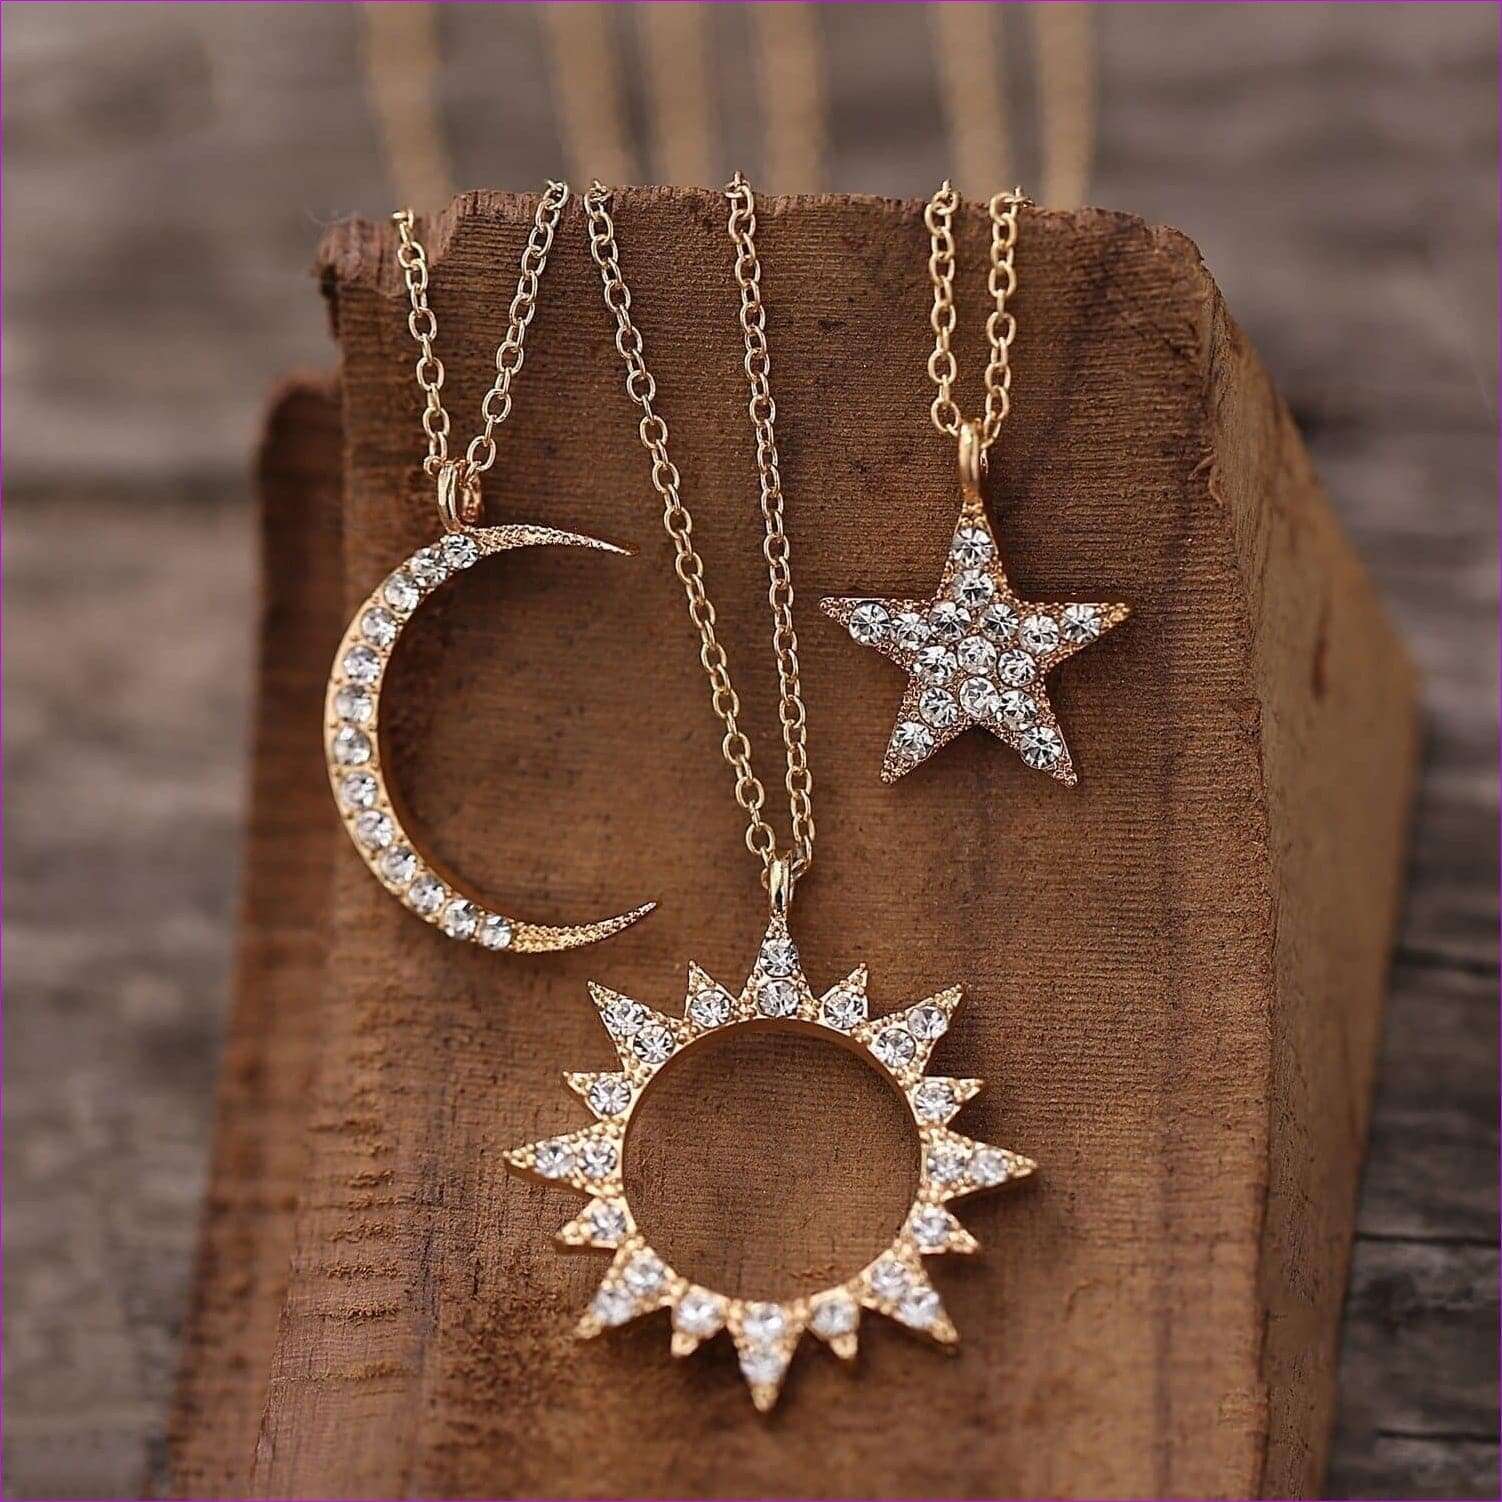 - 3 Piece Celestial Pave Necklace With Austrian Crystals 18K Gold Plated Necklace - necklaces at TFC&H Co.